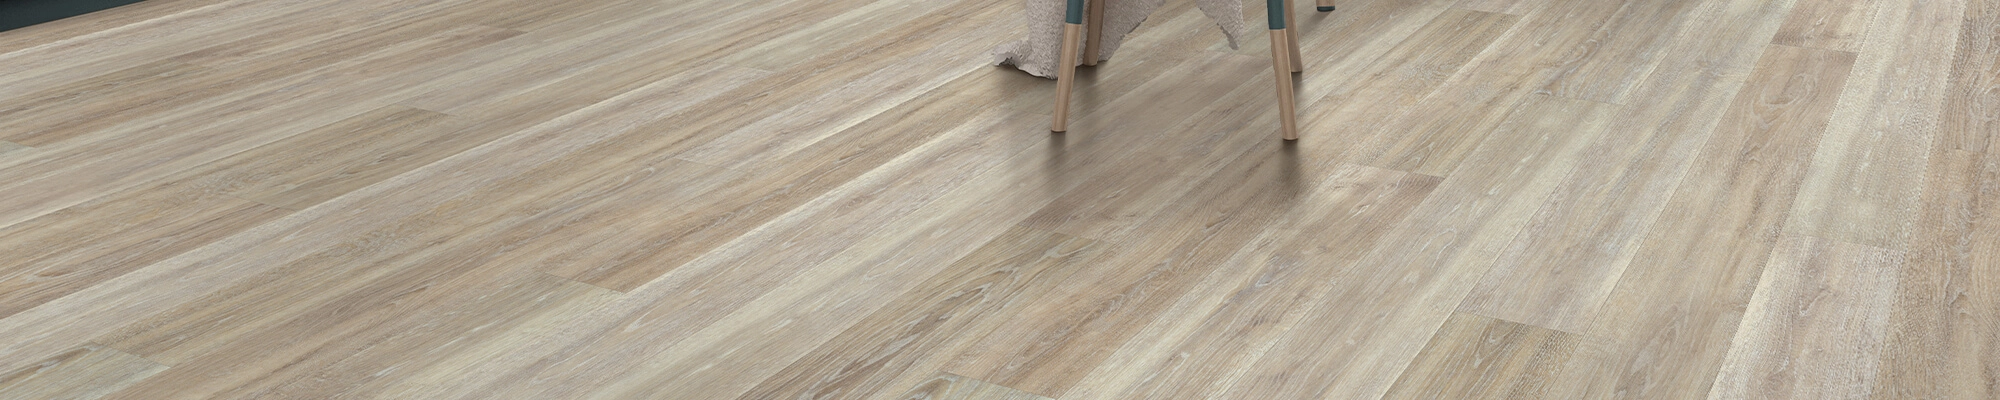 Local Flooring Retailer in Southaven